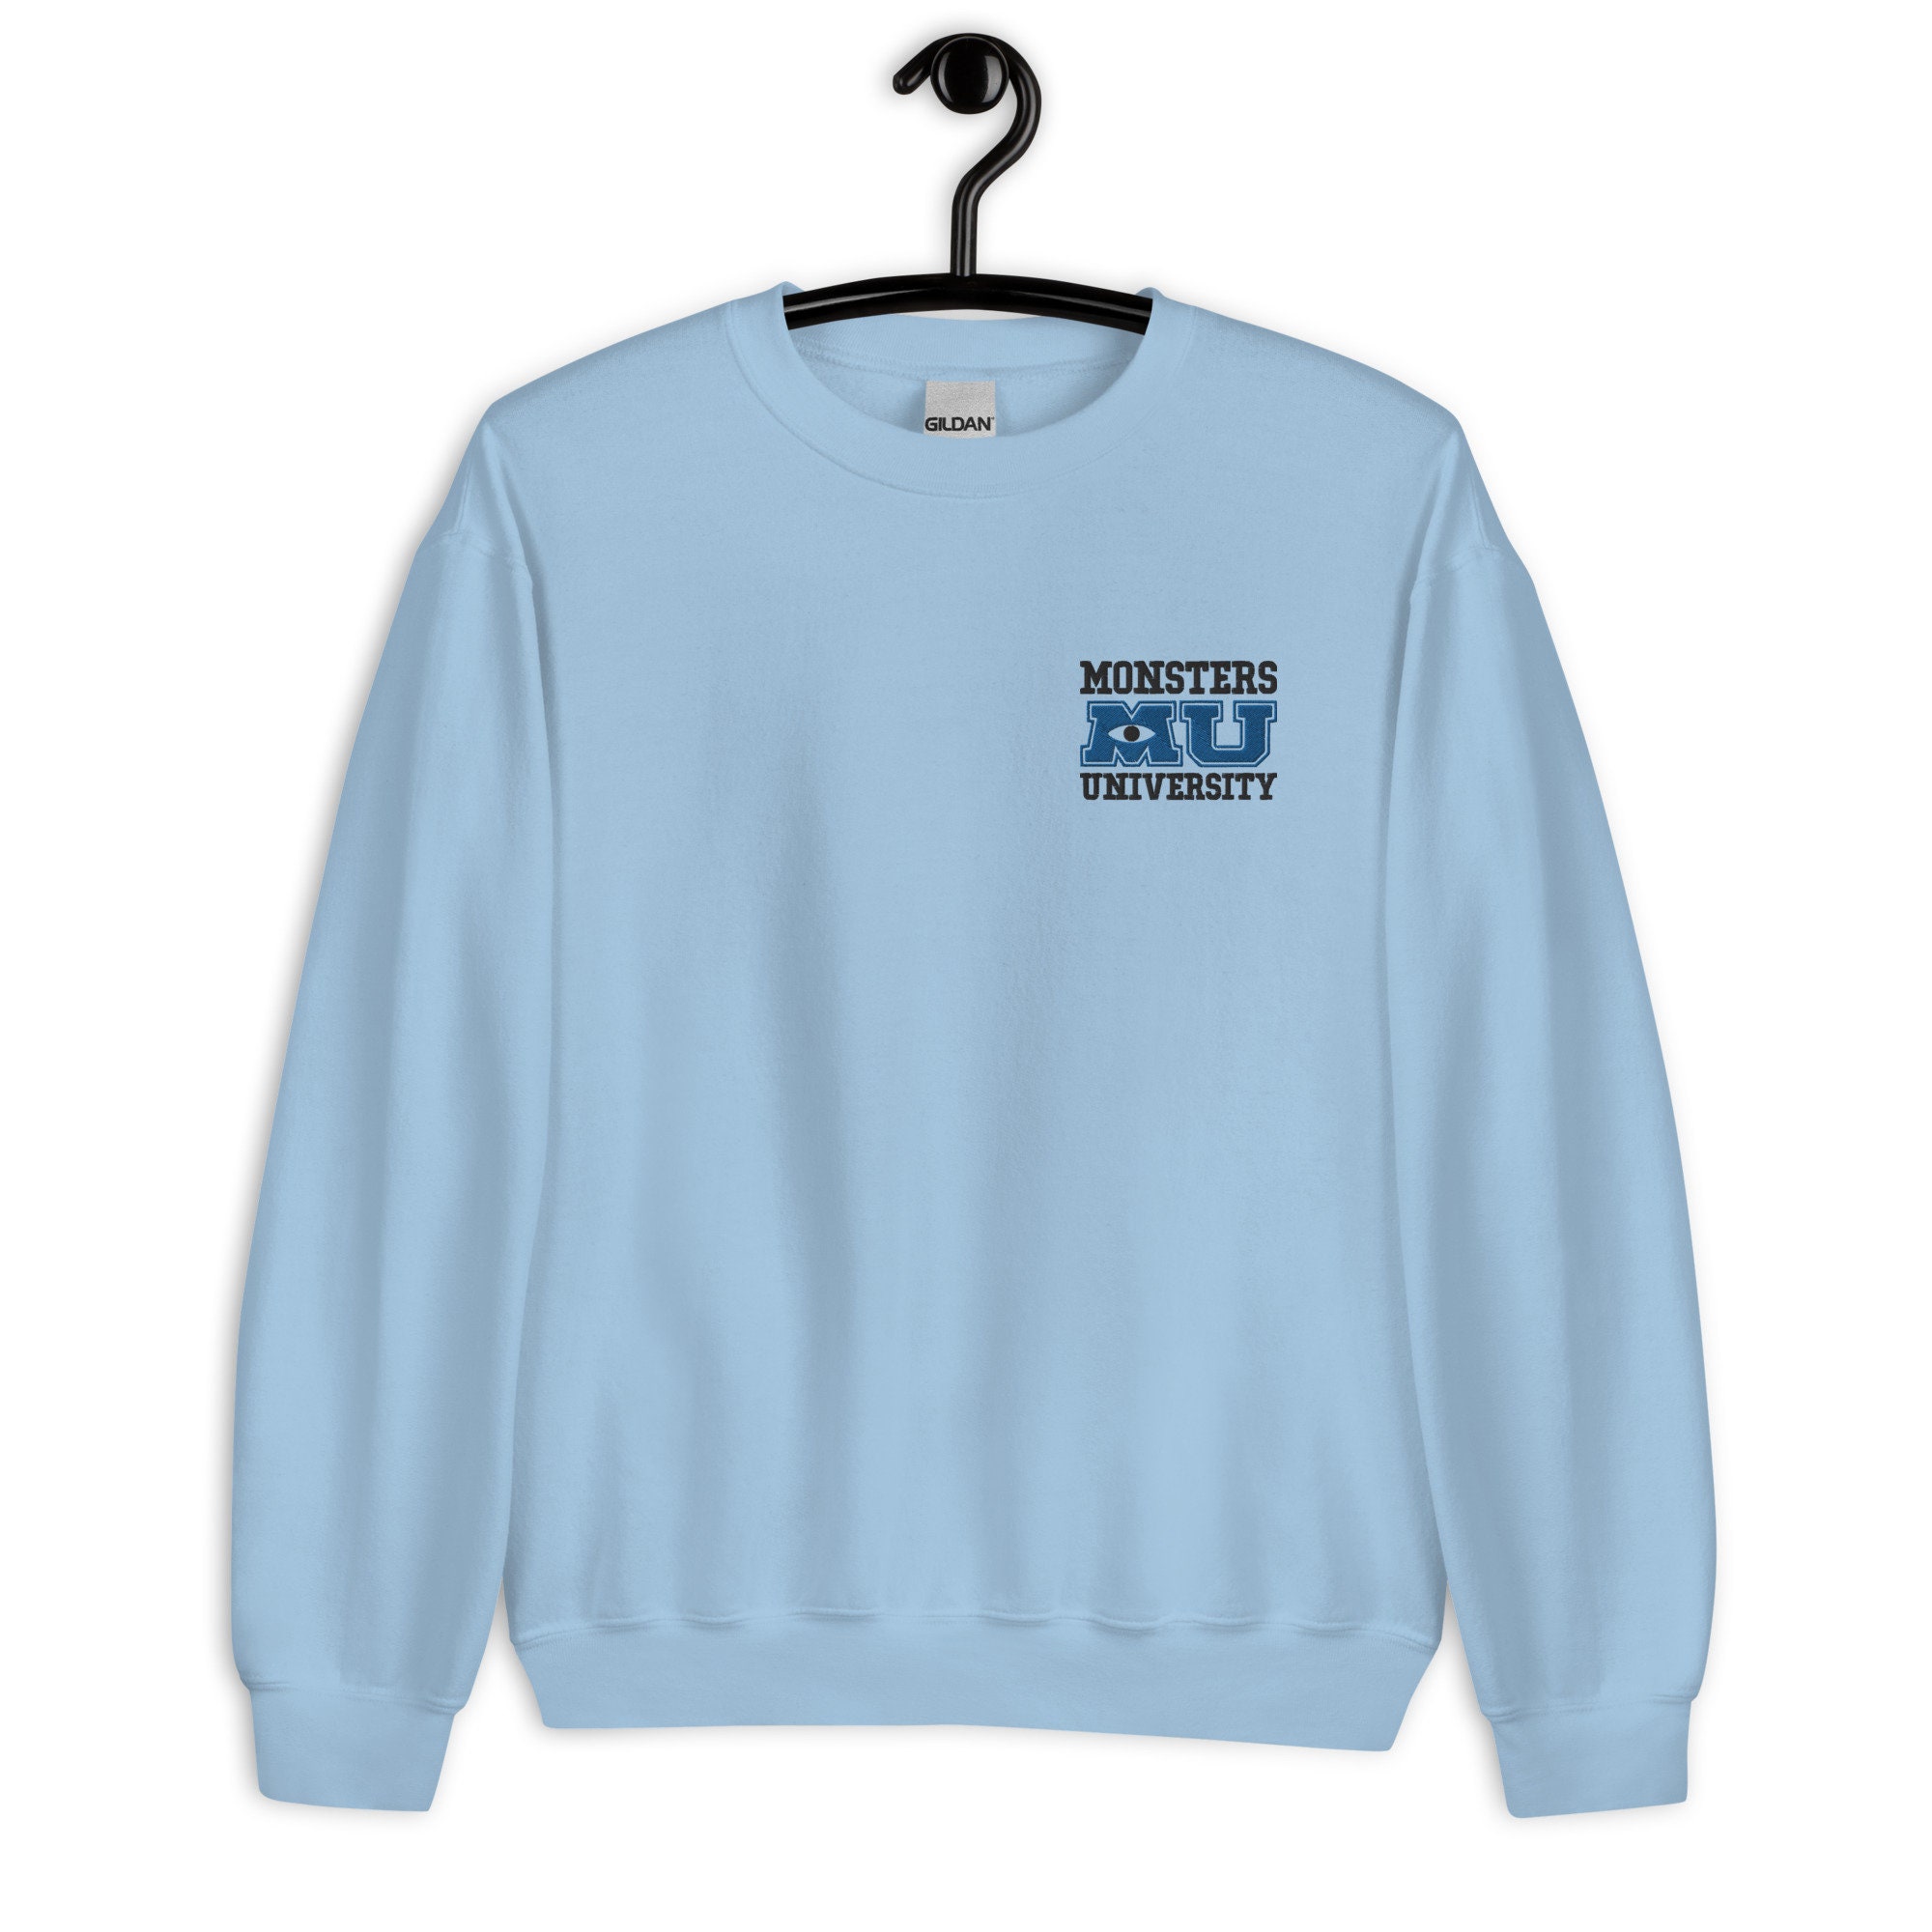 Discover Monsters University Embroidered Unisex Sweatshirt